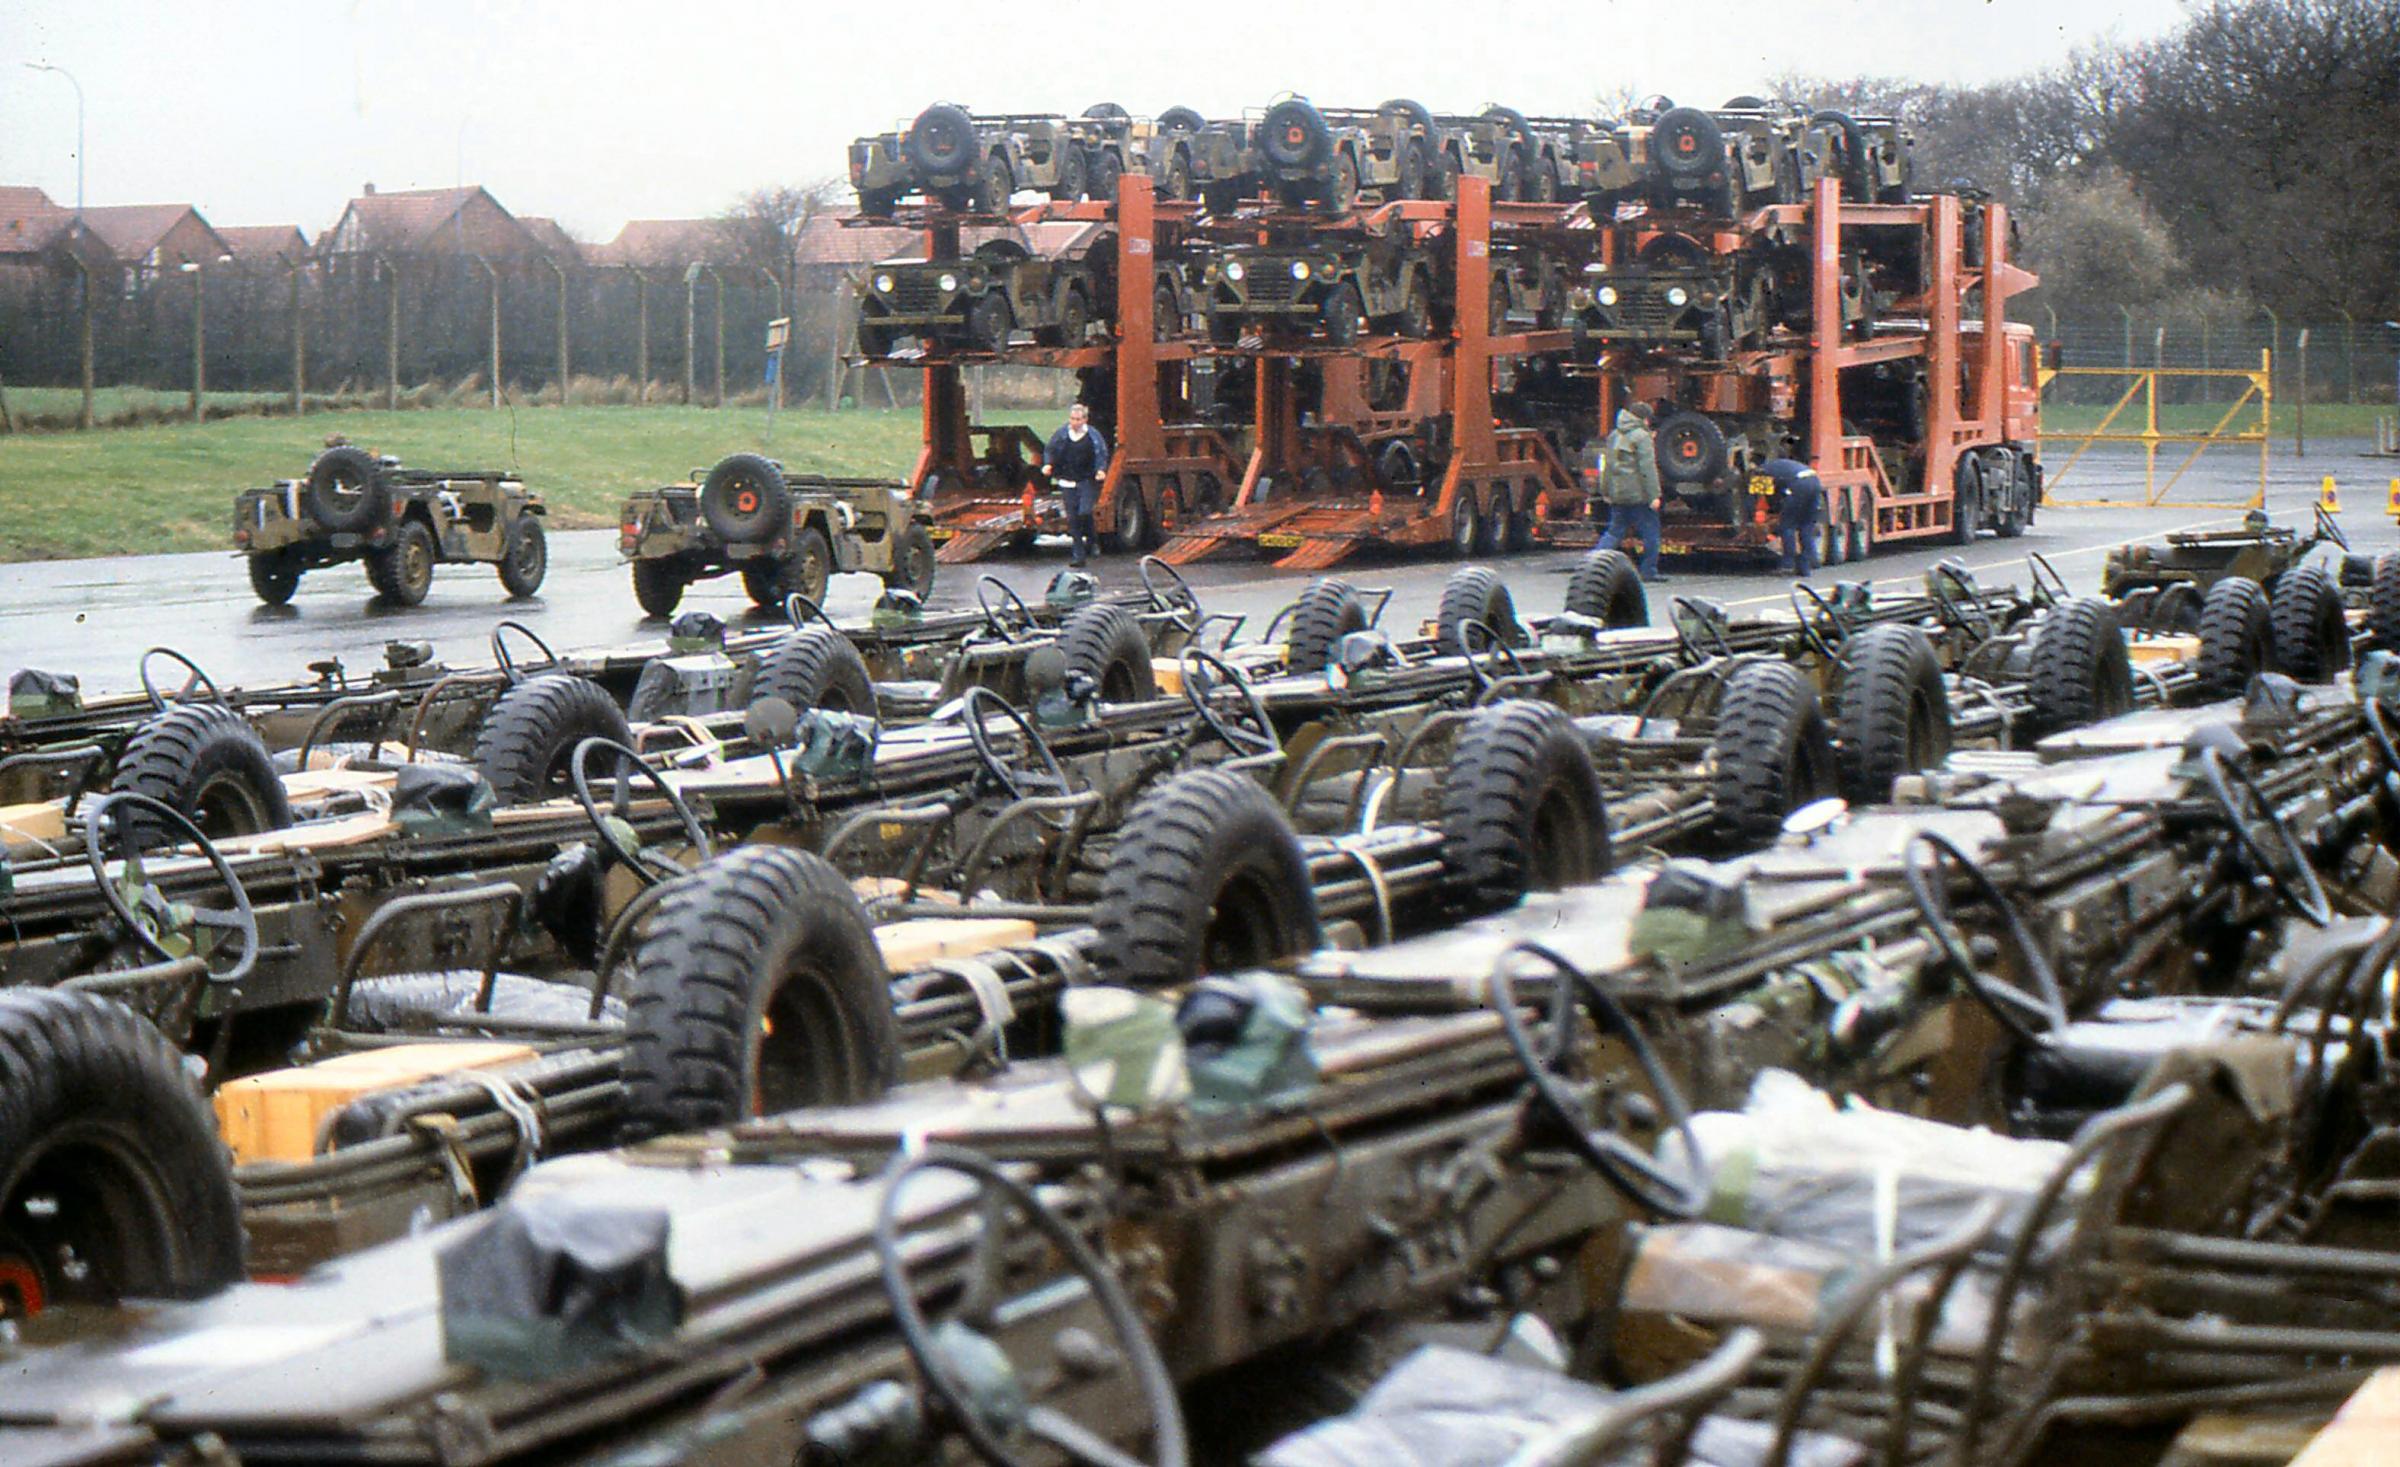 Some of the many jeeps that were kept at the airbase (Images: Eddie Whitham)